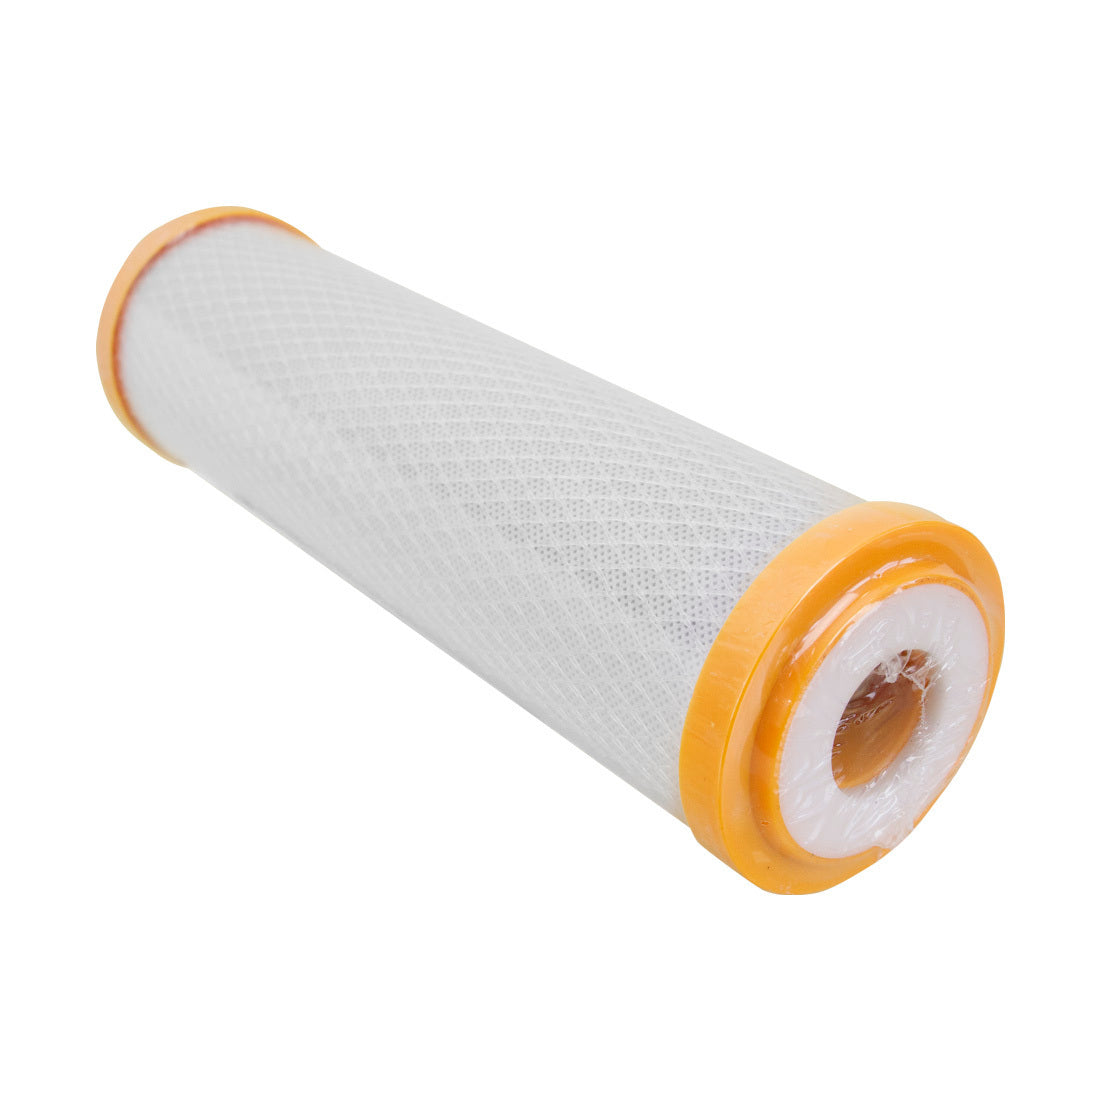 XERO Chloramine Reducing Filter - 2.5 x 10 Side View